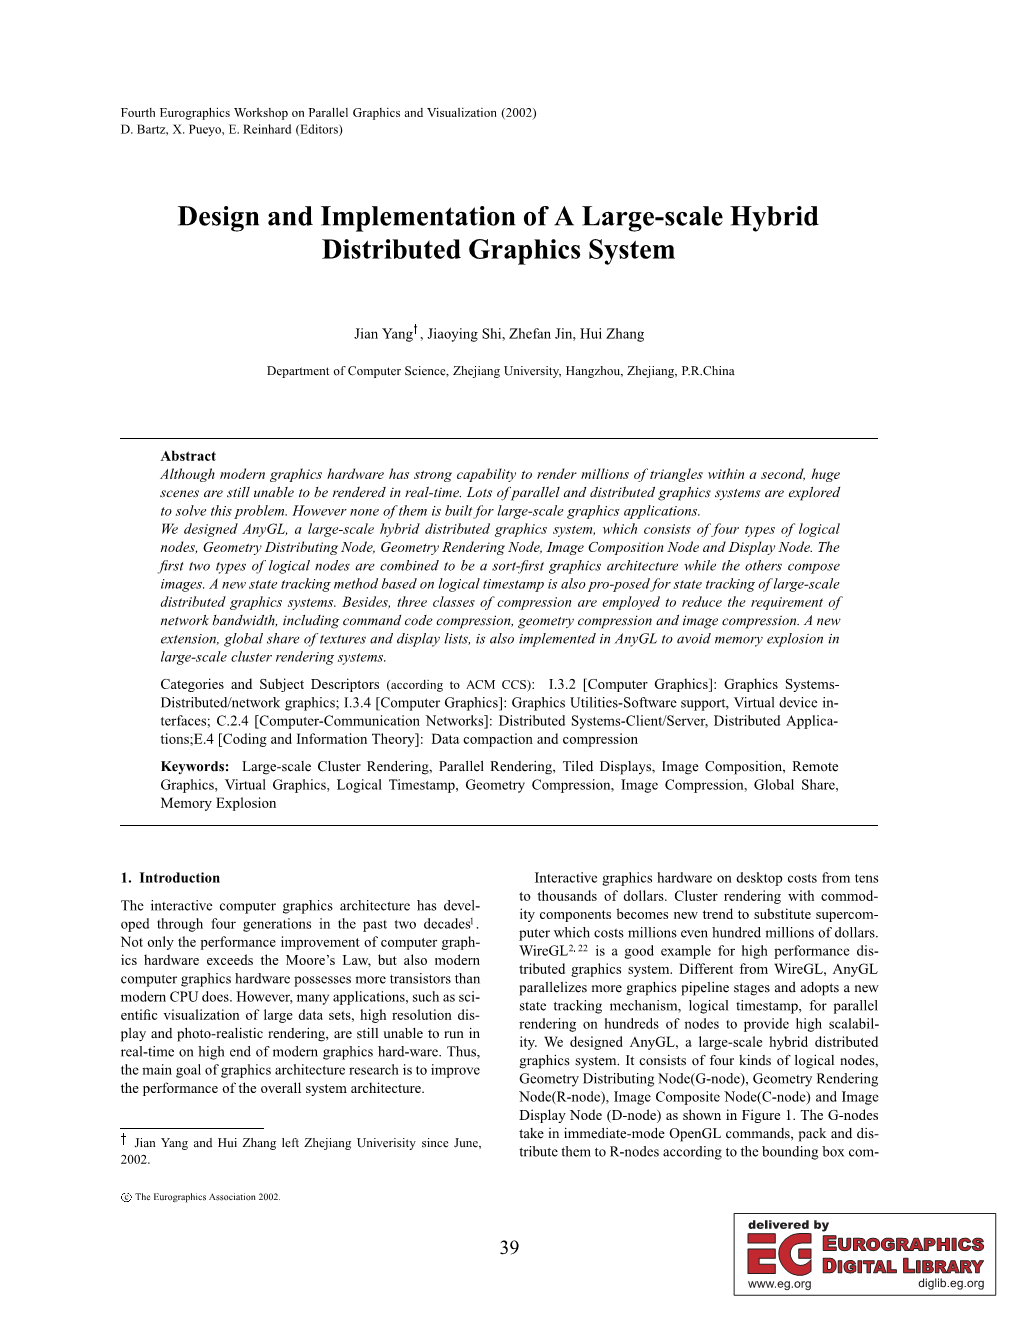 Design and Implementation of a Large-Scale Hybrid Distributed Graphics System